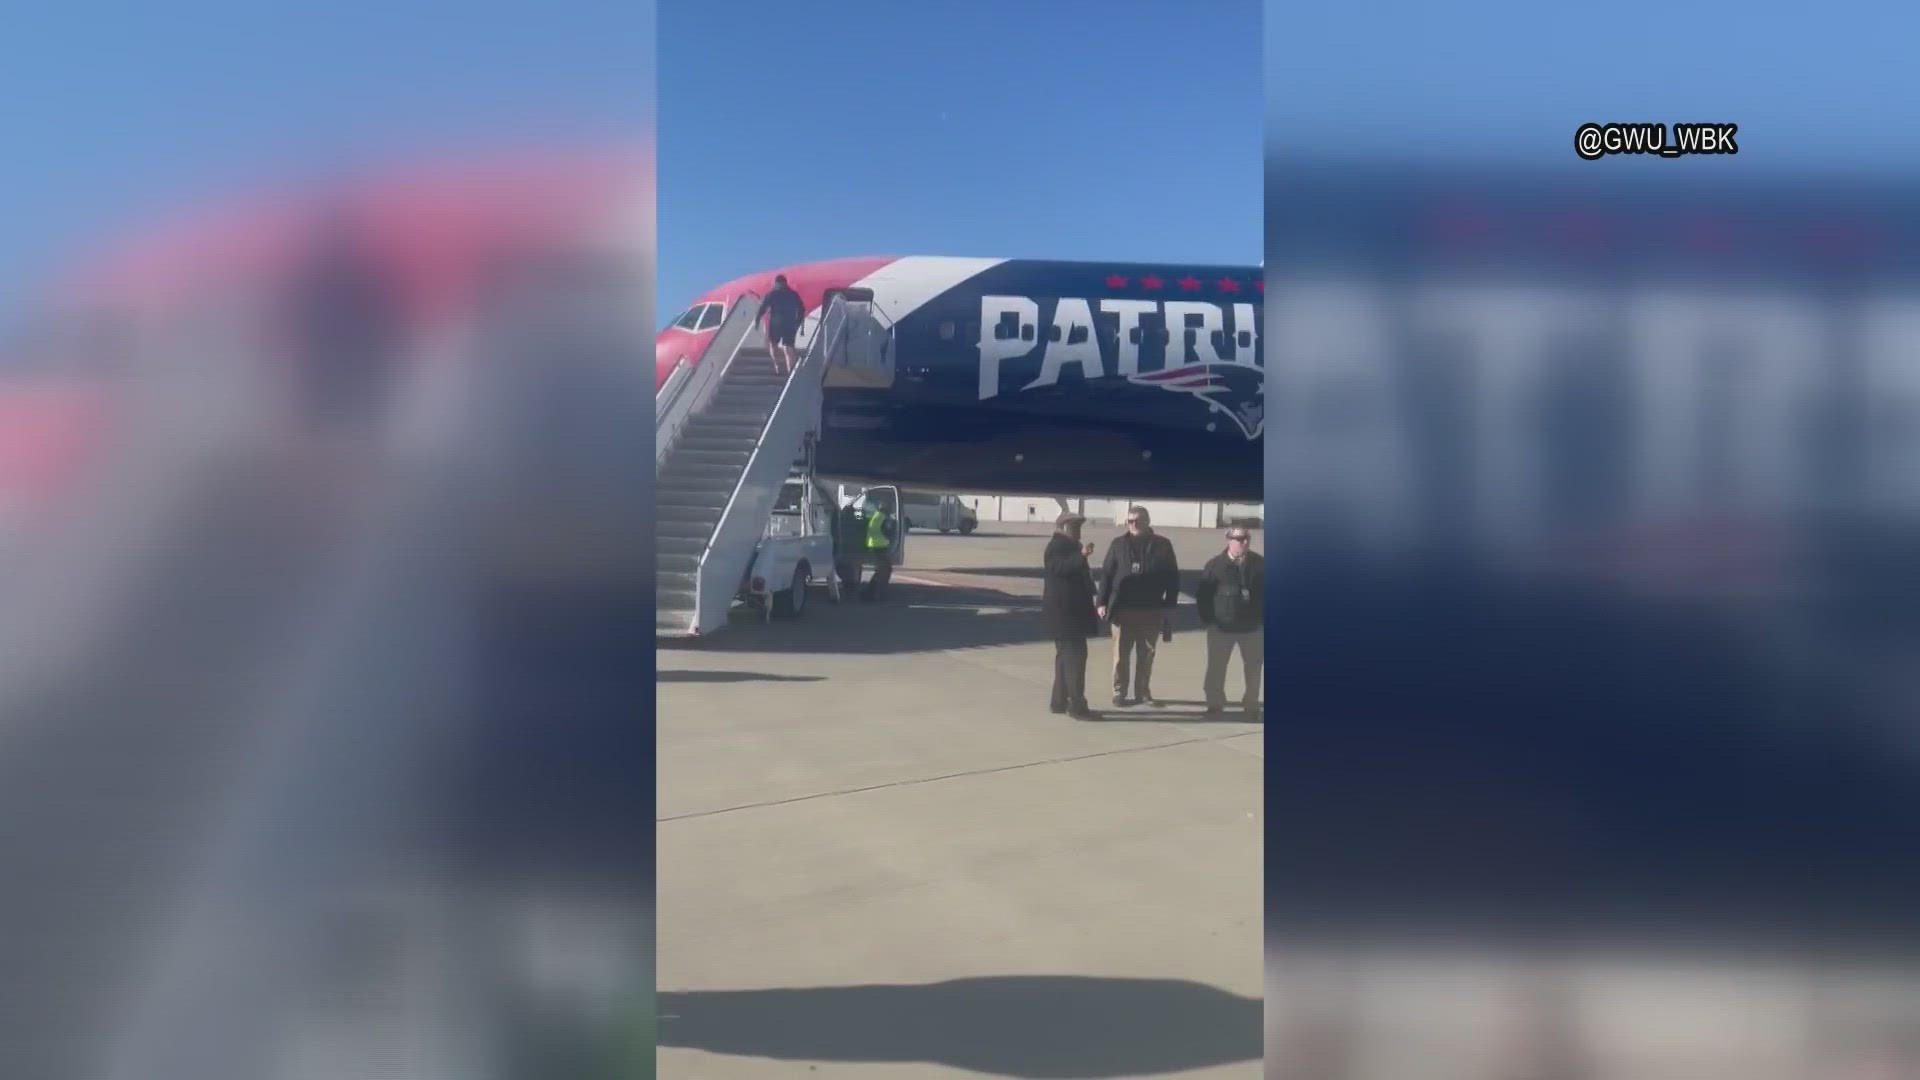 That's right: the team flew on the same chartered plane used by the Patriots!